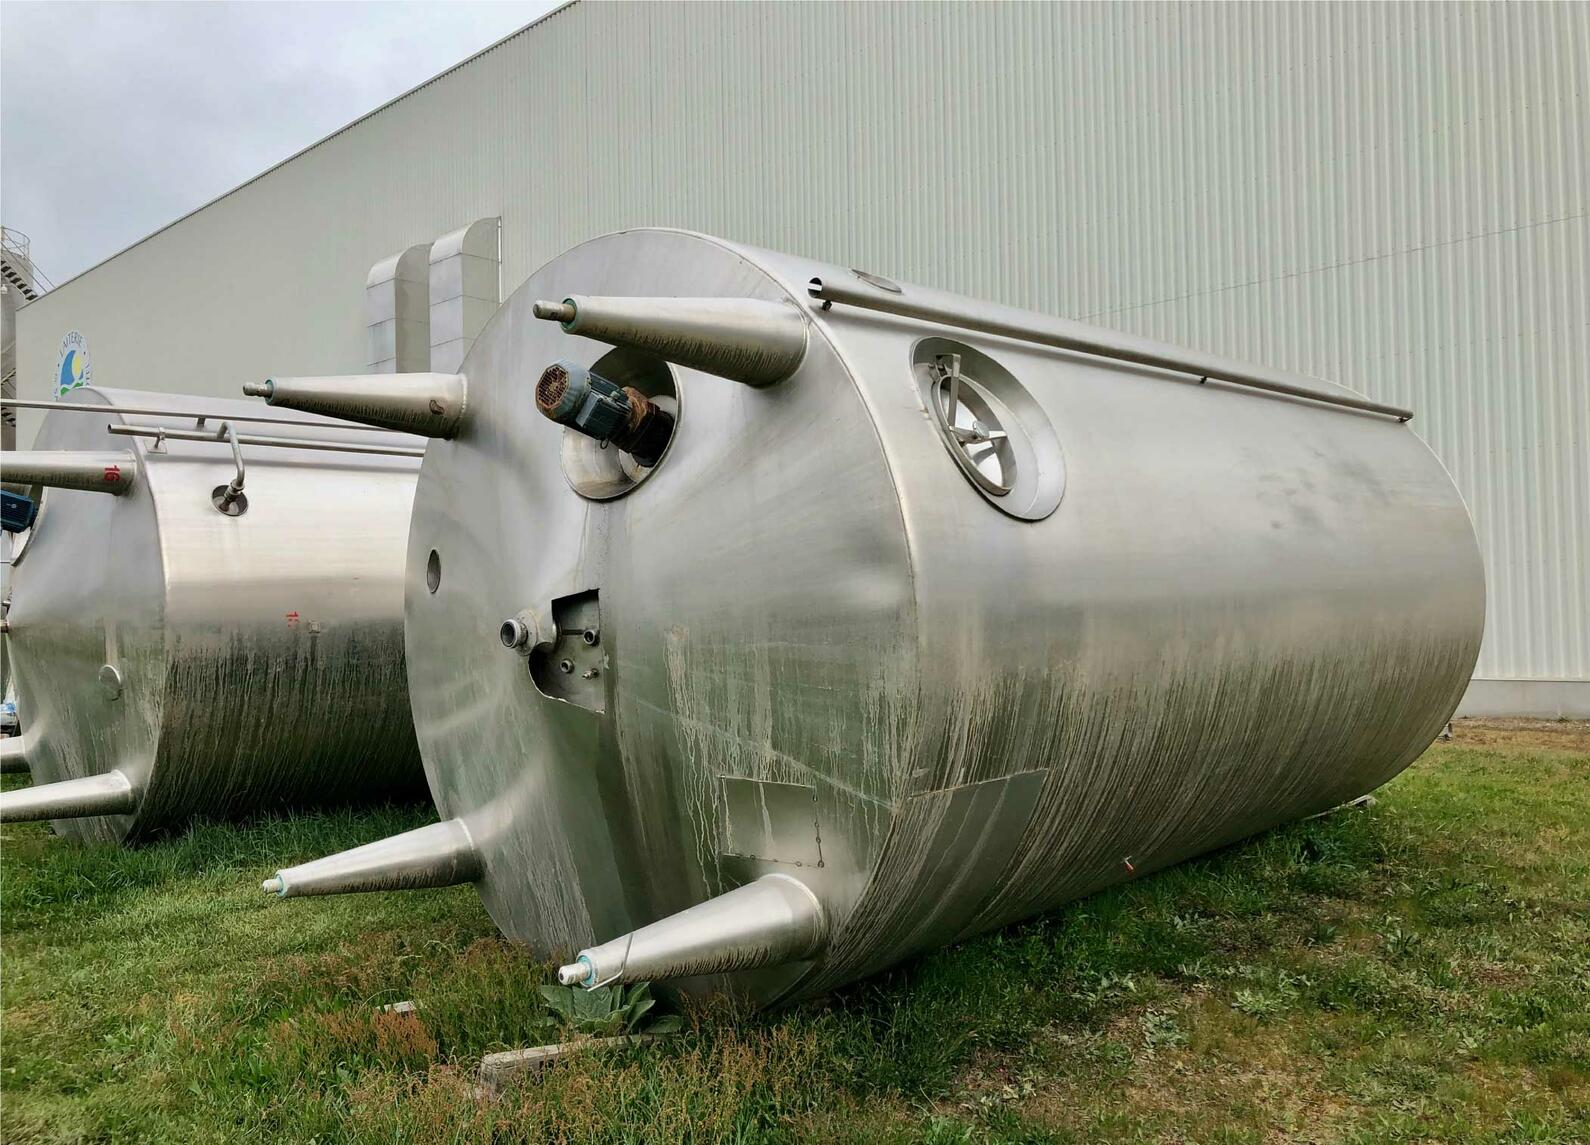 Insulated stainless steel tank - Storage